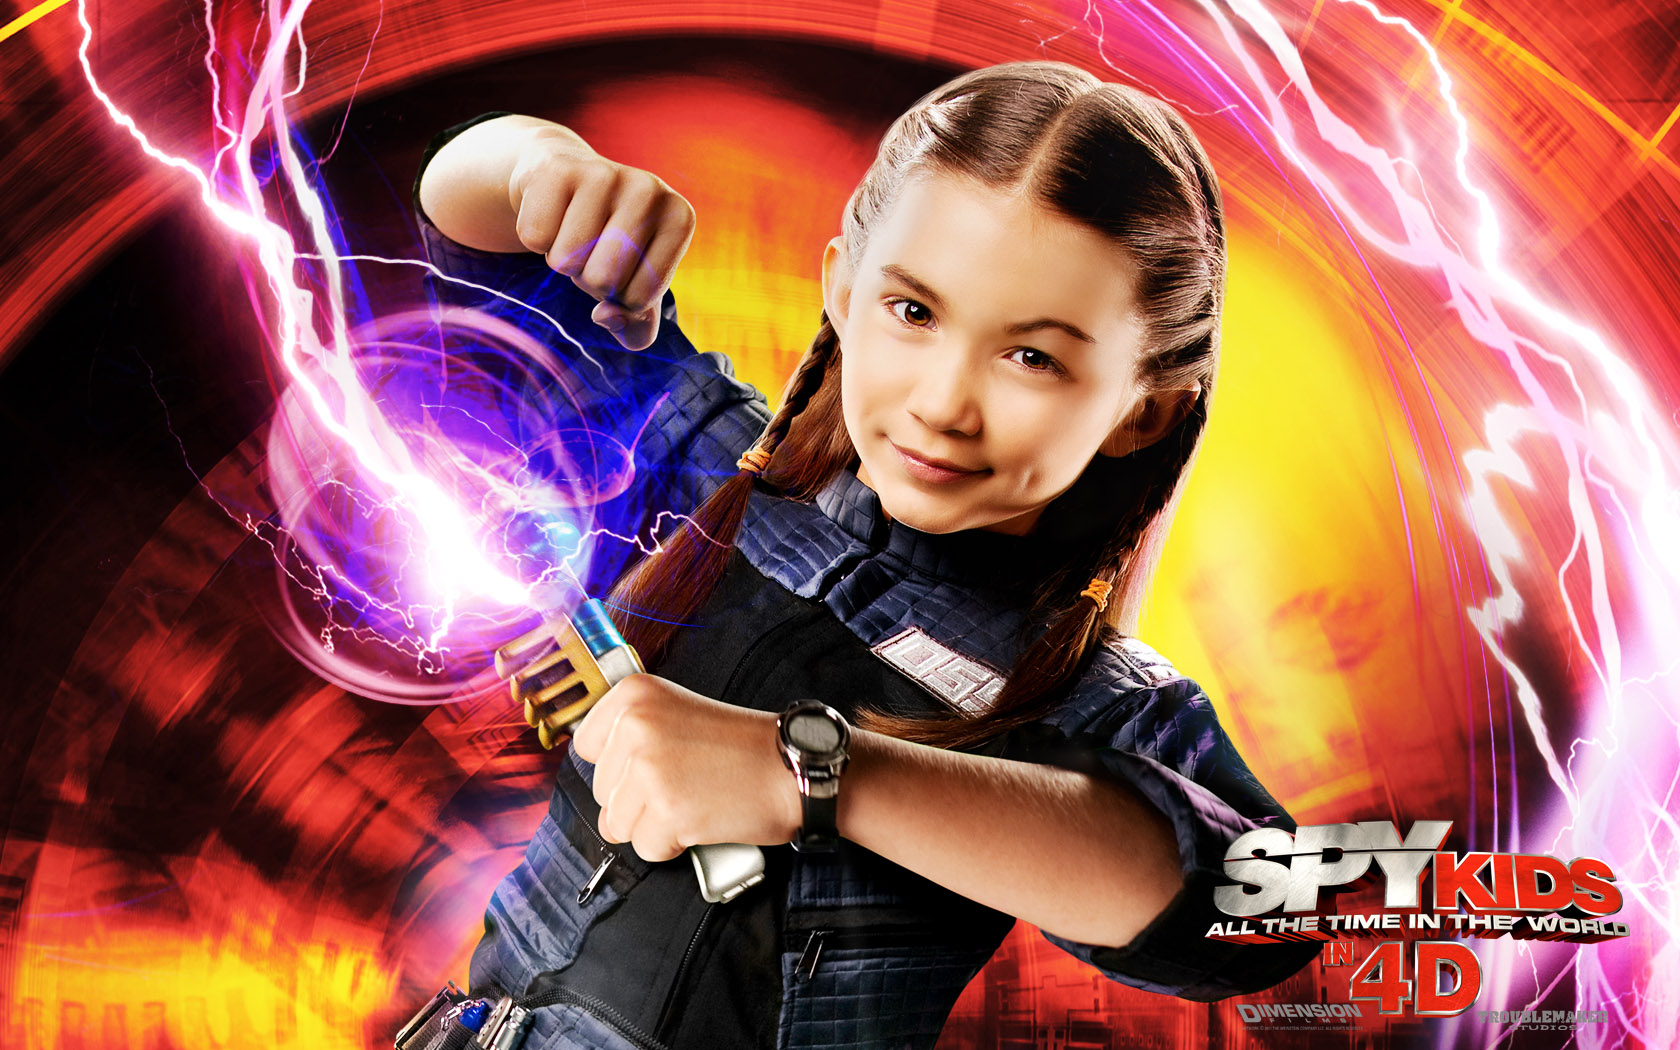 Amazing Spy Kids Pictures & Backgrounds